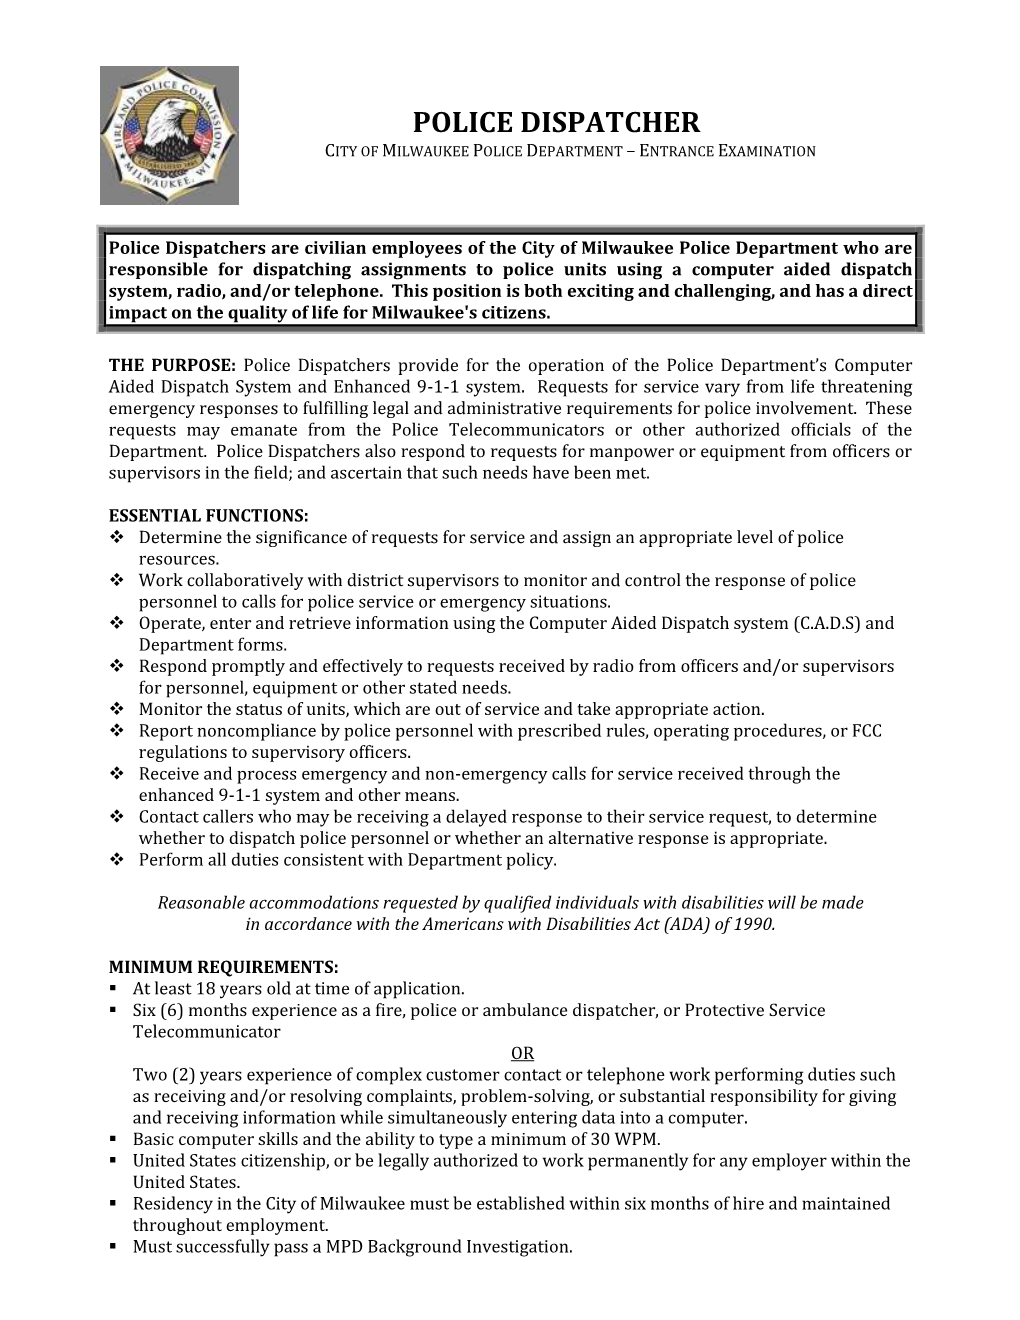 Police Dispatcher City of Milwaukee Police Department – Entrance Examination